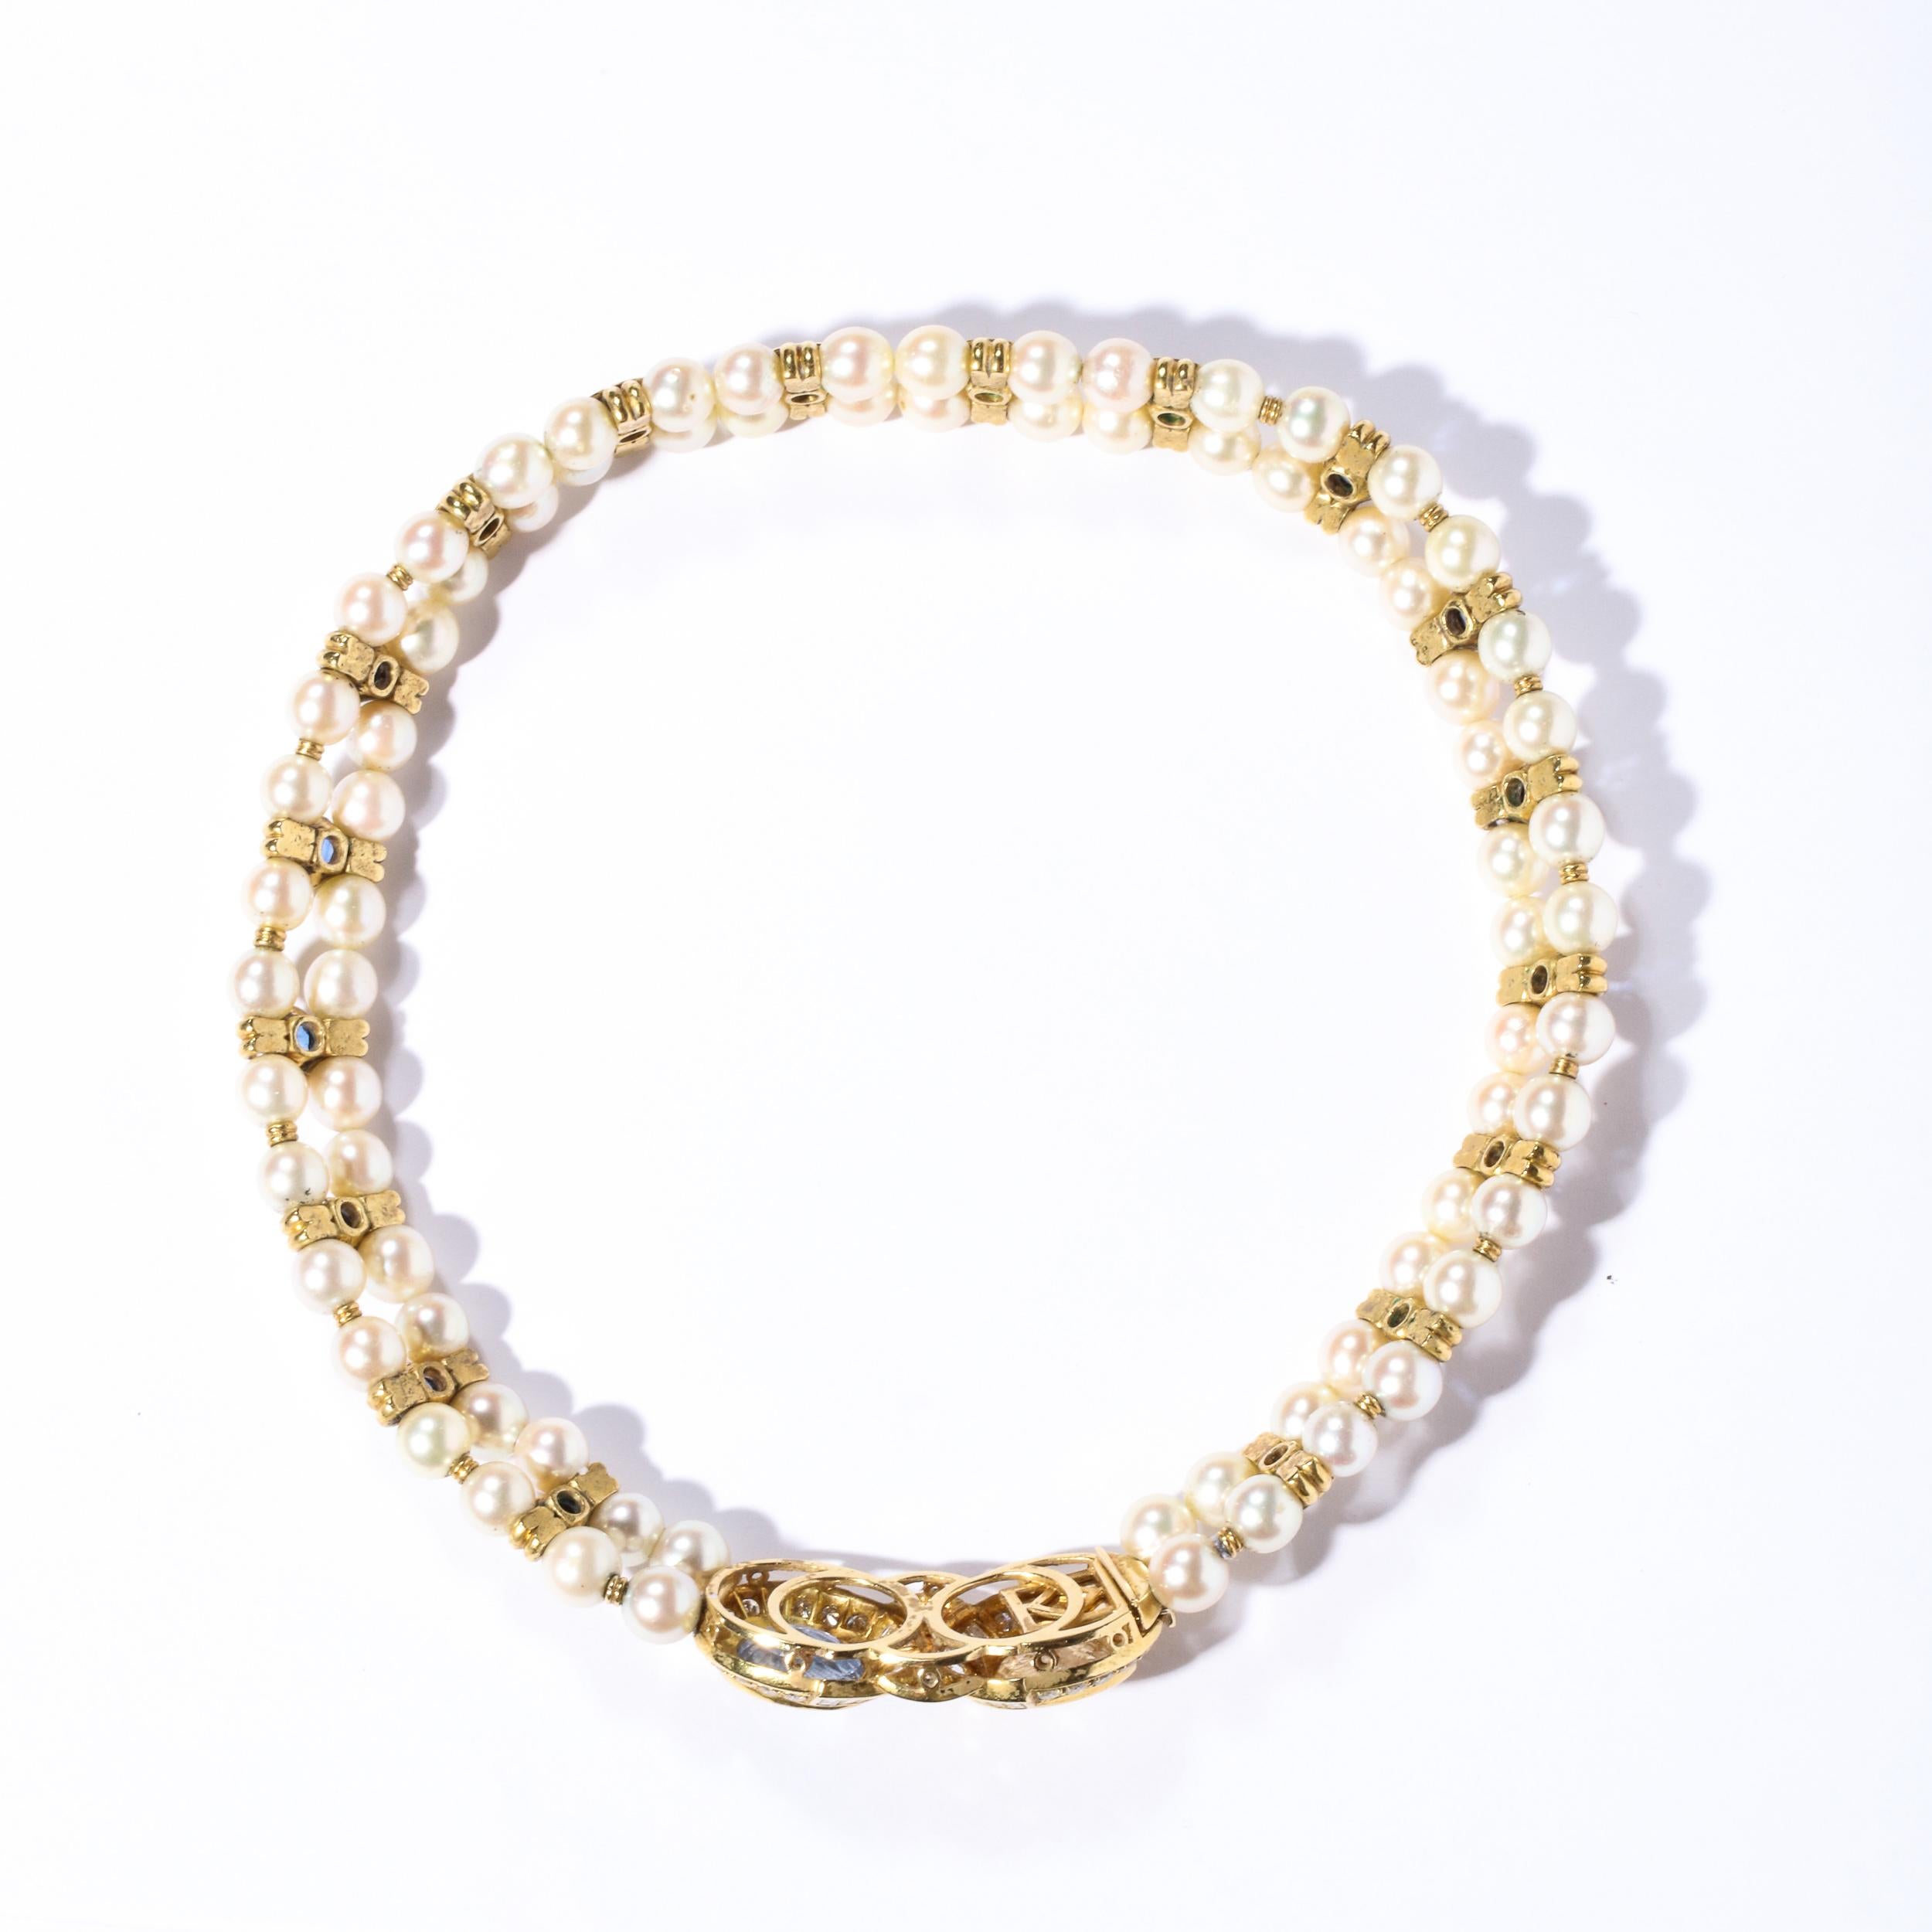 Double Strand Pearl Necklace  with Carved Citrine & Iolite, 18k and Diamonds  For Sale 4